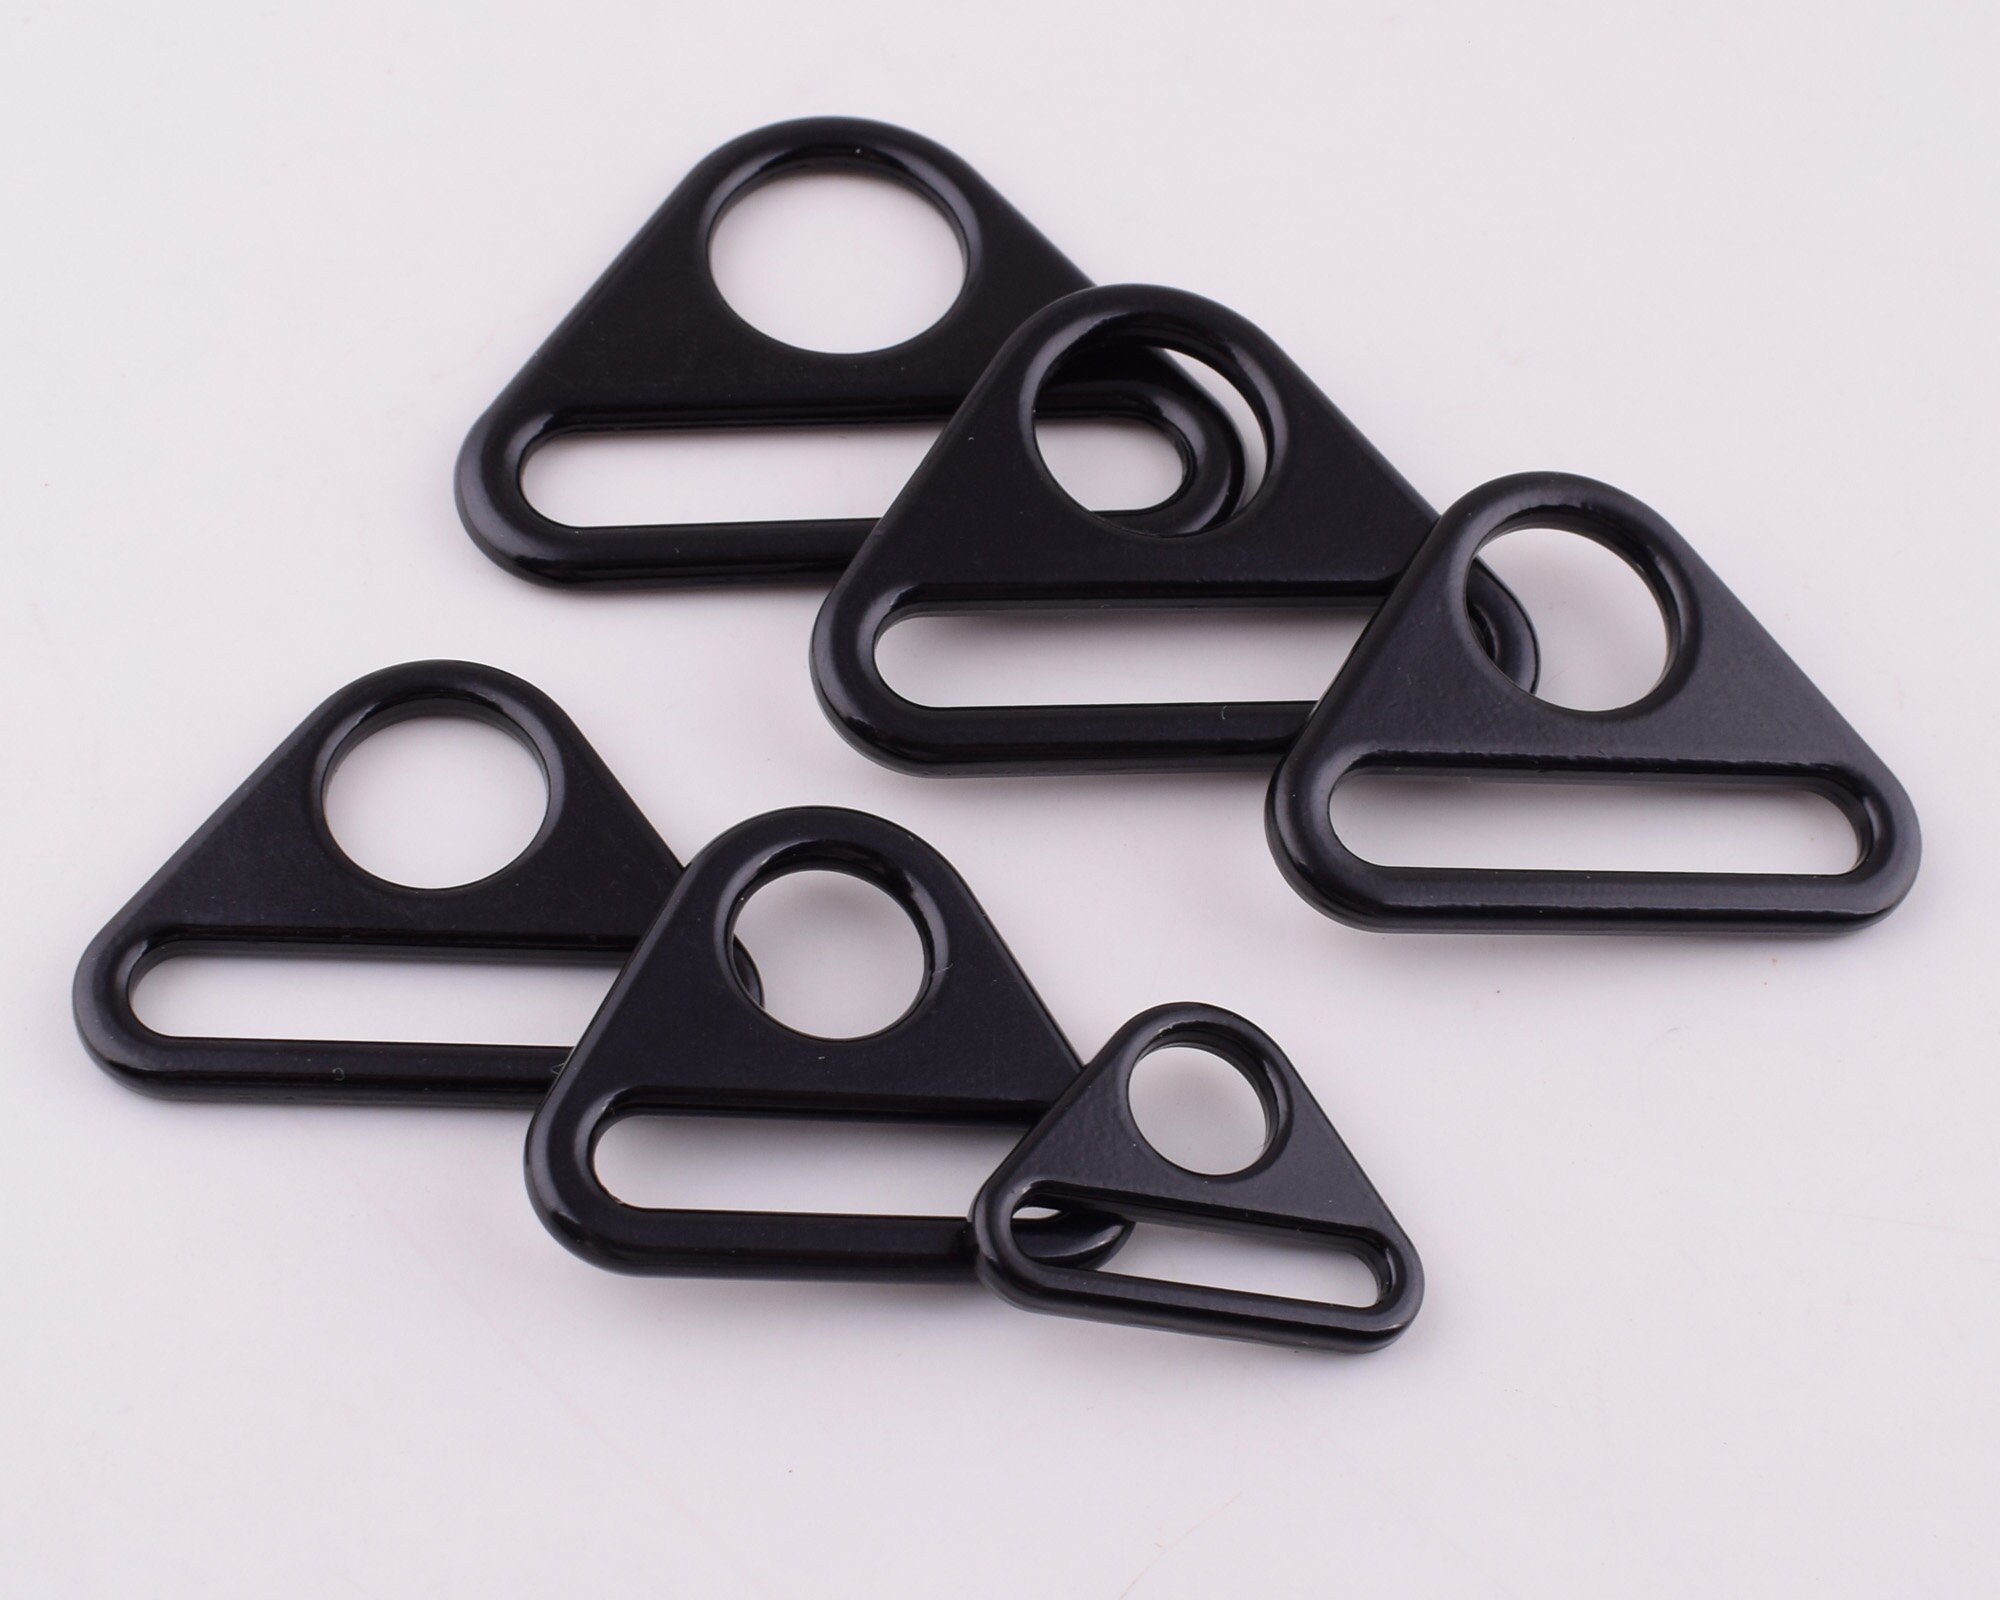 Wuuycoky 1 Inner Diameter Zinc Alloy Black Triangle Buckle Triangle Adjuster Ring Pack of 10 